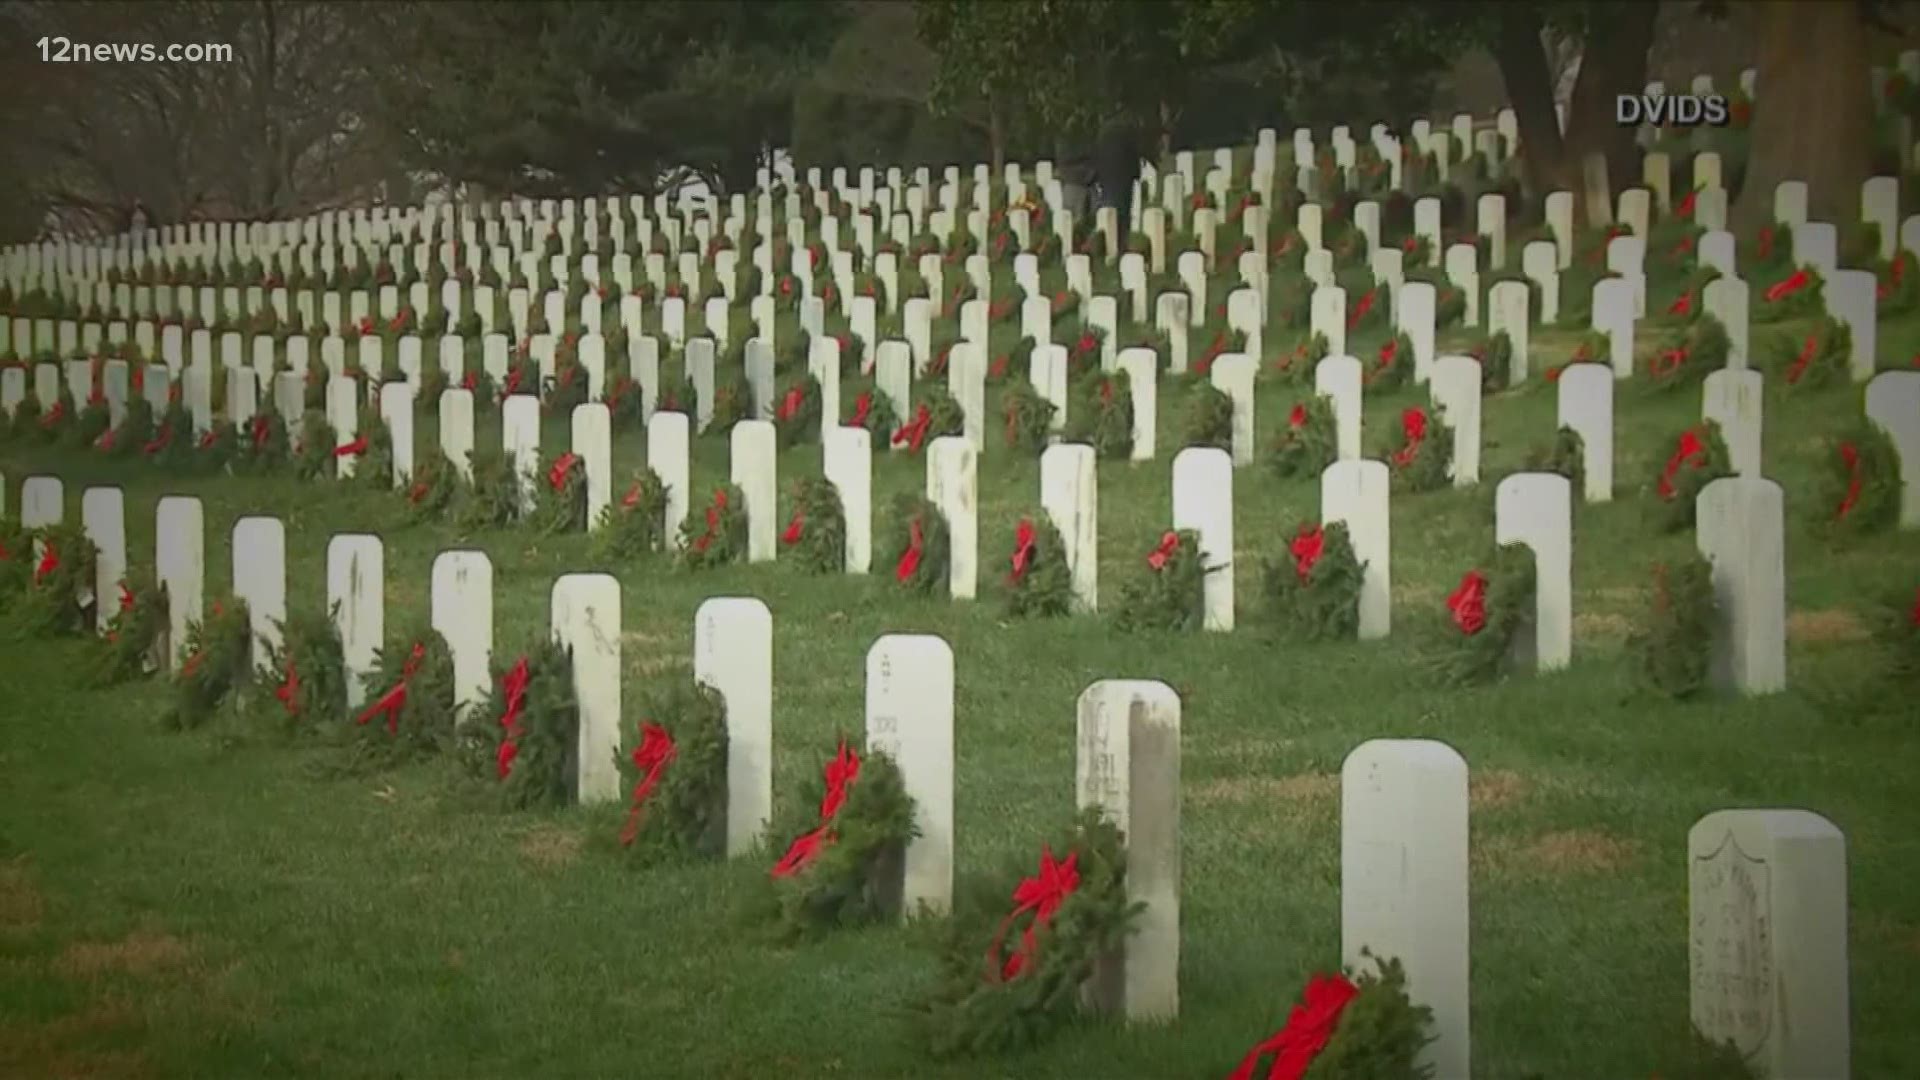 Every year in December, volunteers from Phoenix and around the country lay wreaths to honor veterans.